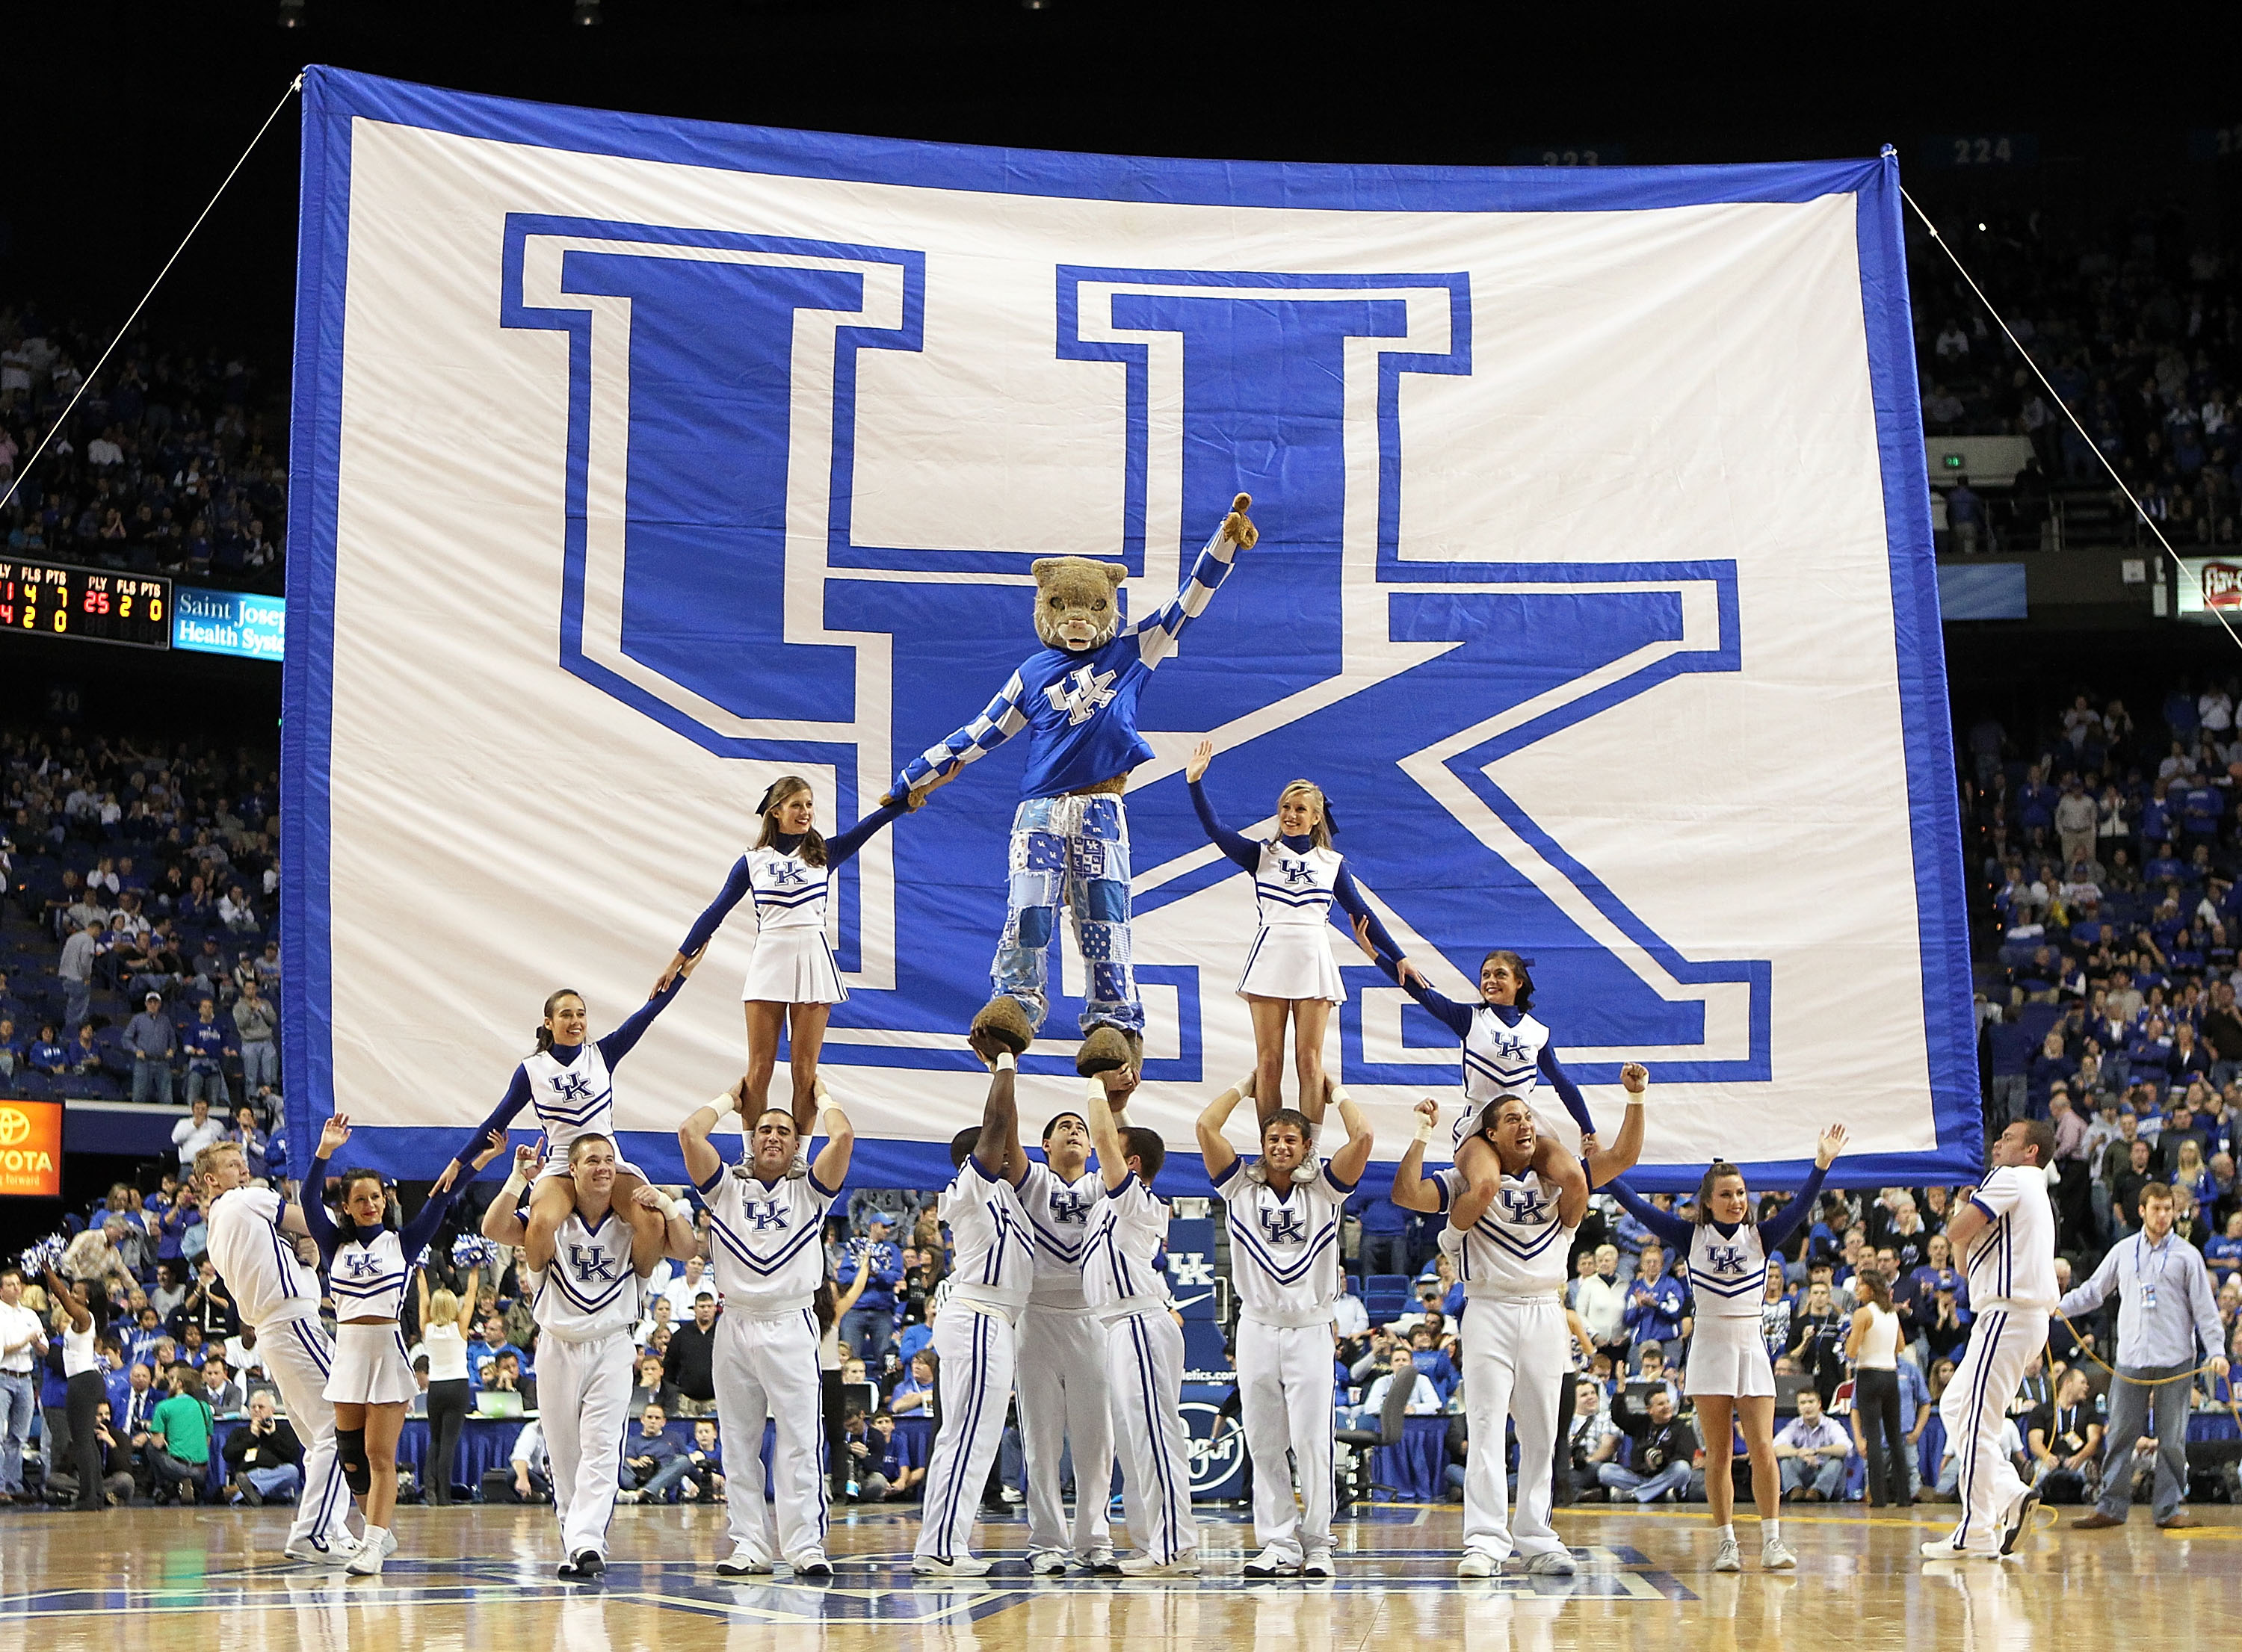 LEXINGTON, KY - NOVEMBER 30:  The Kentucky Wildcats cheerleaders perform during the game against the Boston University Terriers on November 30, 2010 in Lexington, Kentucky.  (Photo by Andy Lyons/Getty Images)